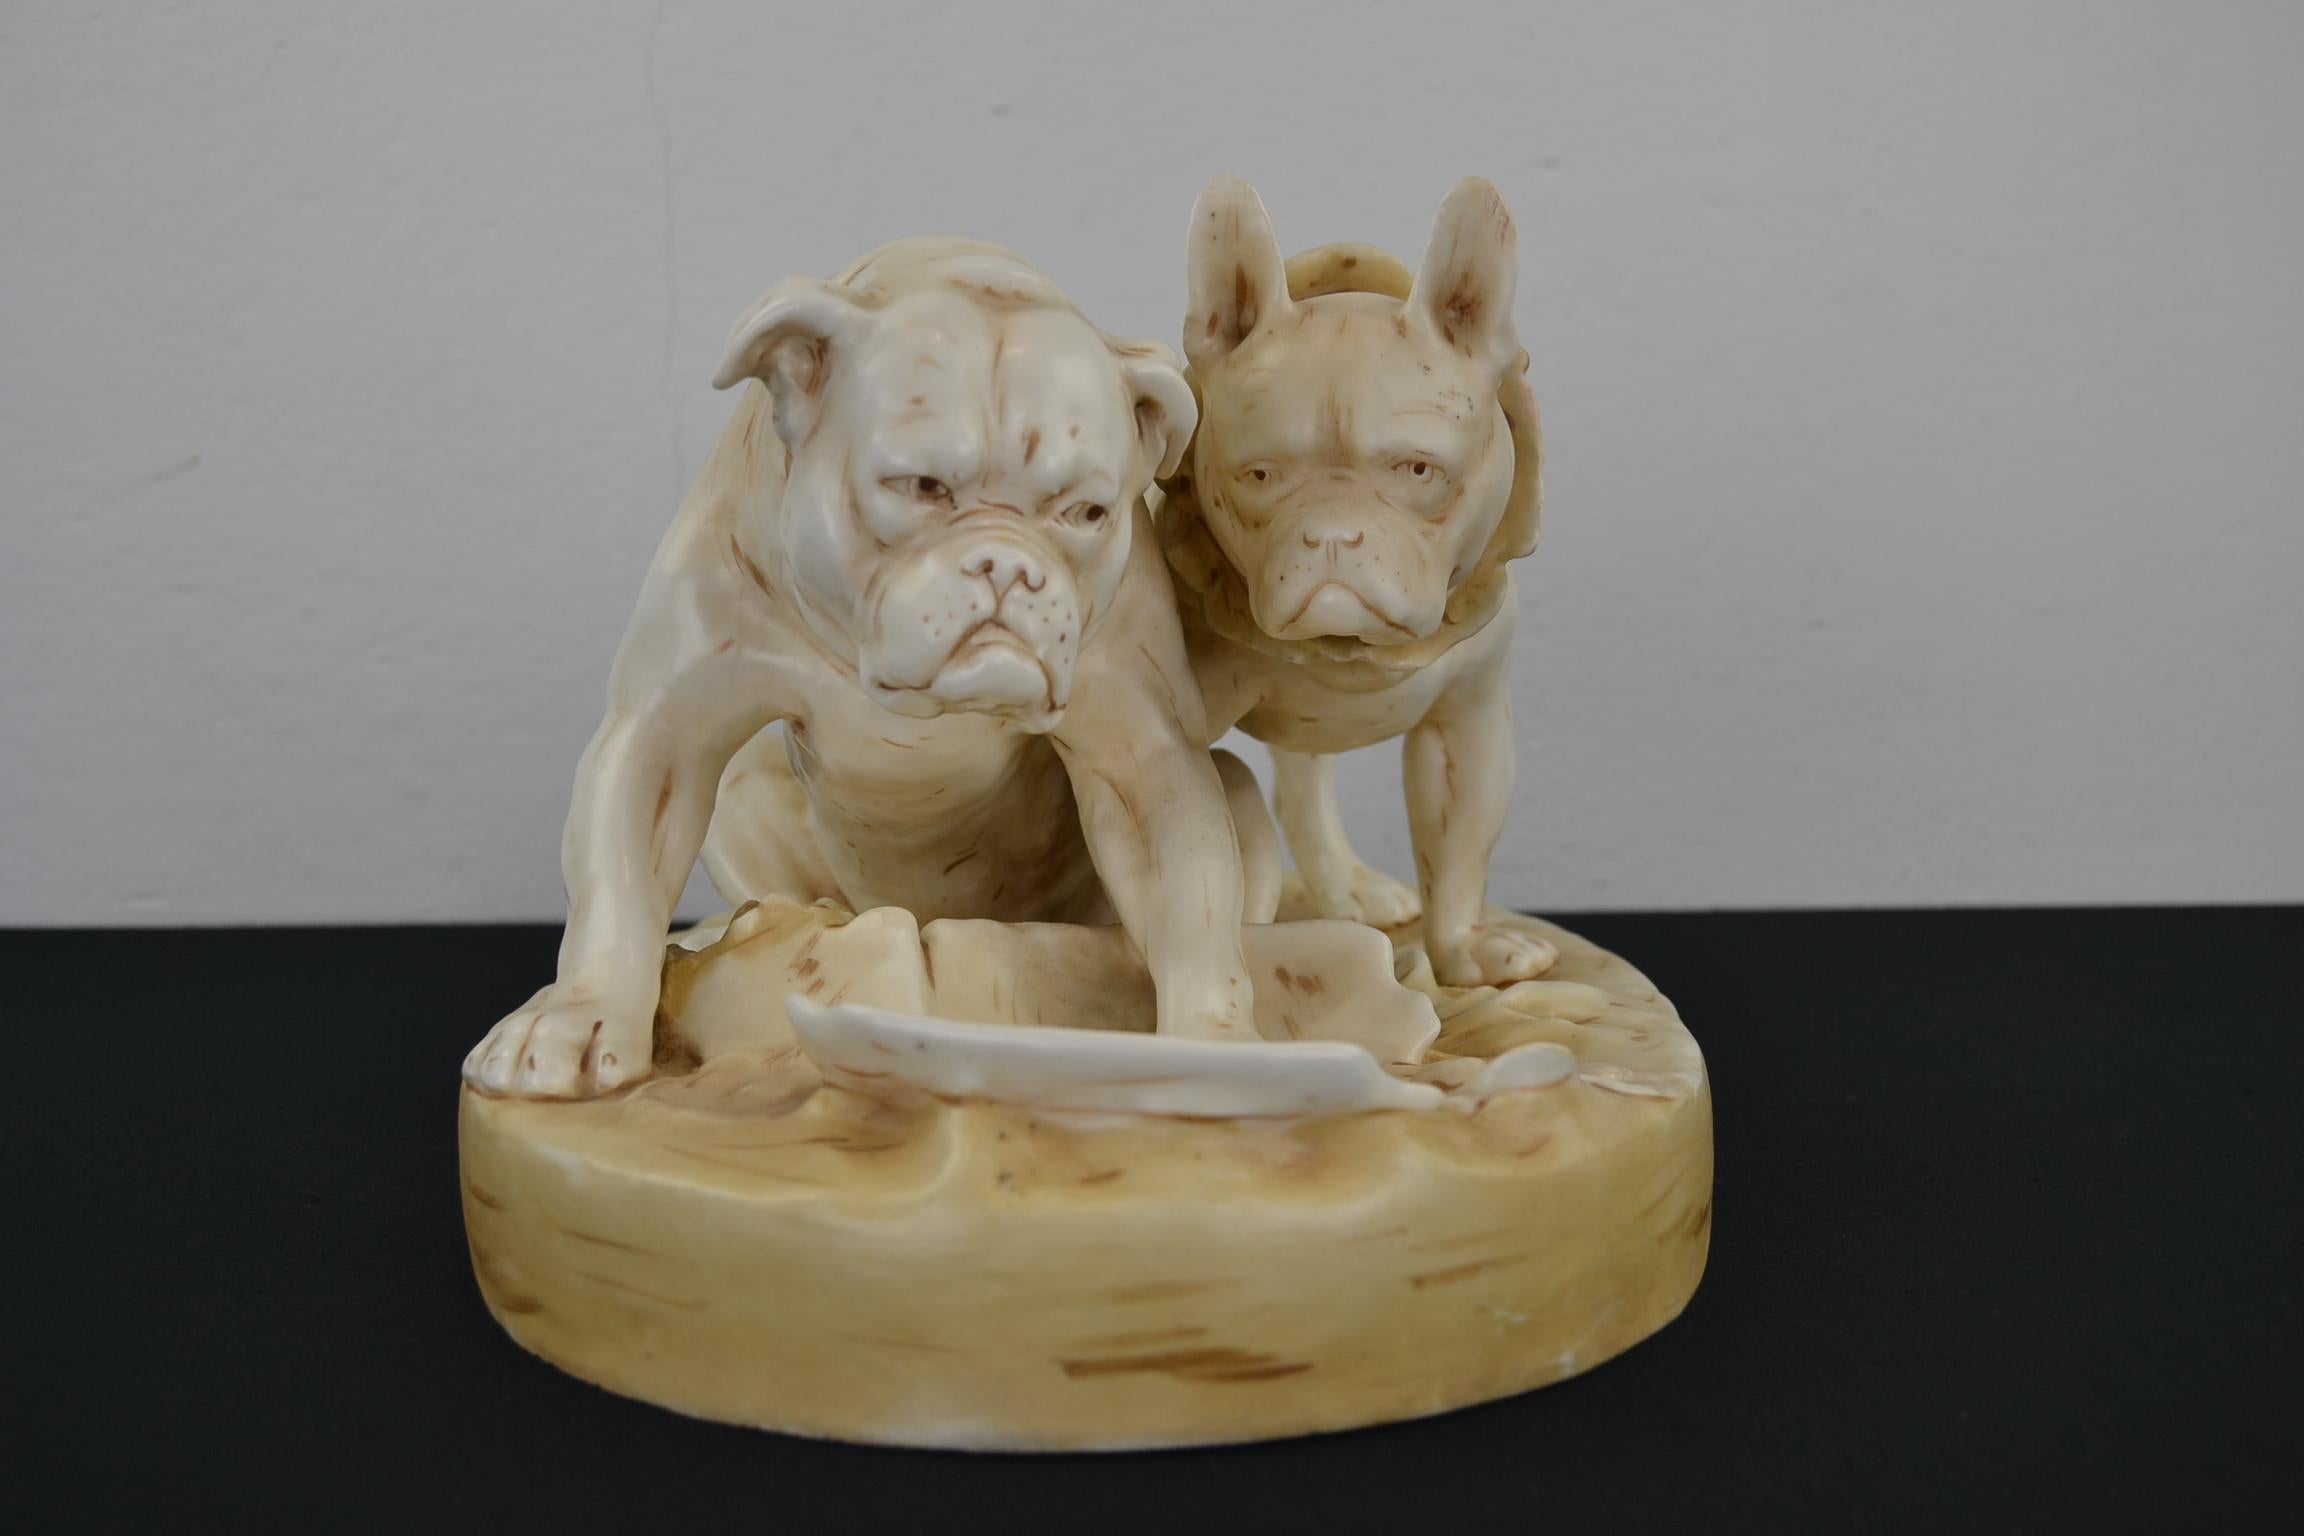 Antique Group of Bulldog, French and English Bulldog Sculpture 1